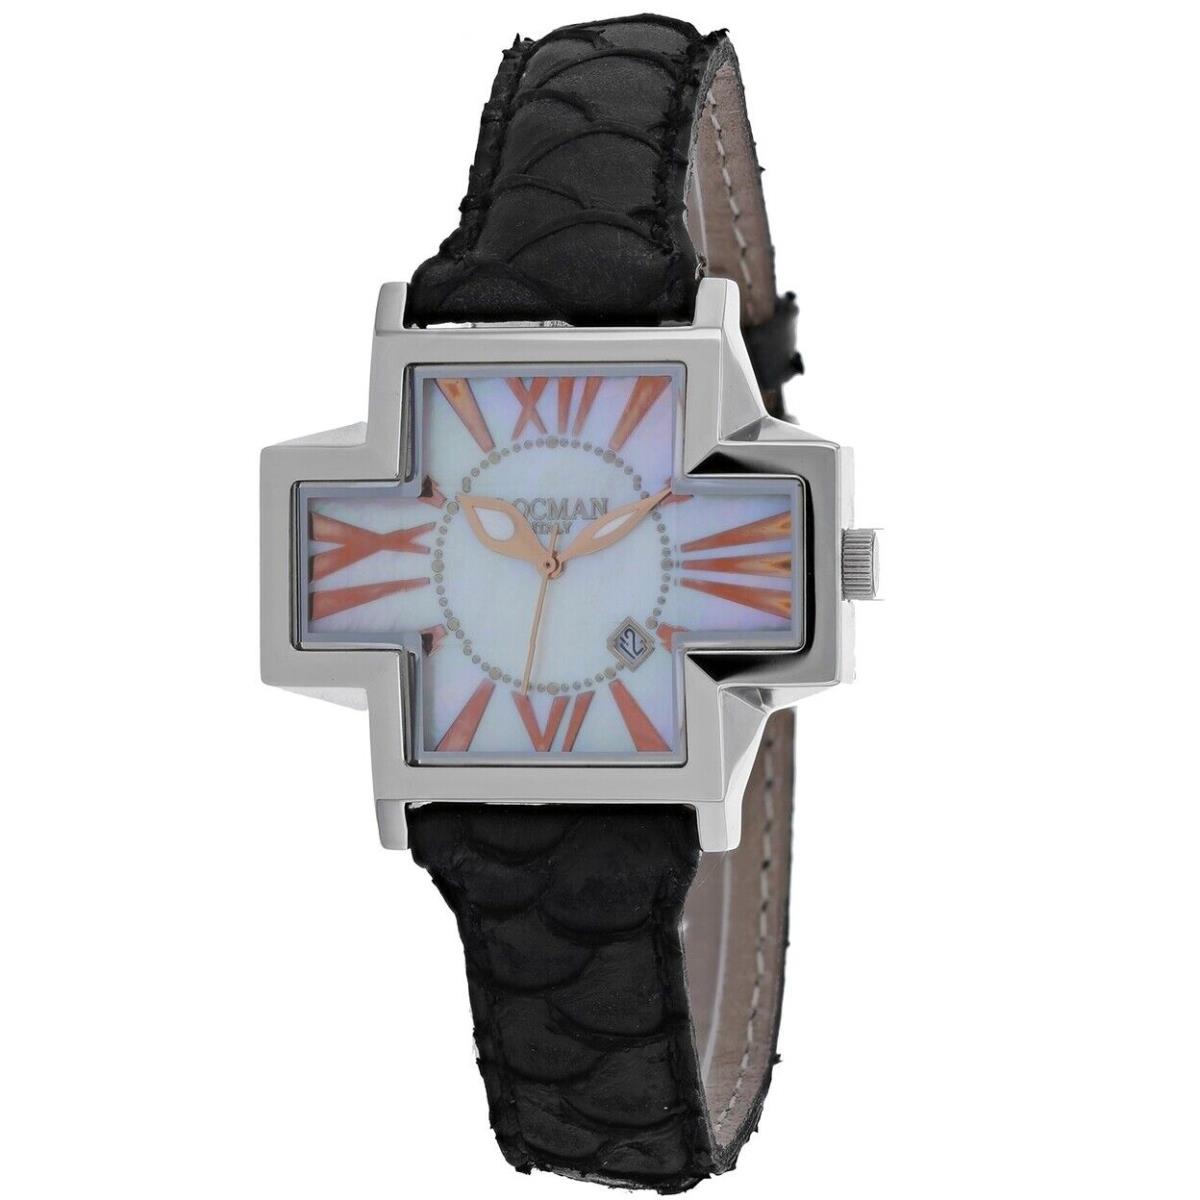 Locman Womens Italy Plus Mother Of Pearl Dial Watch - 181Mopwh/Bk Ks